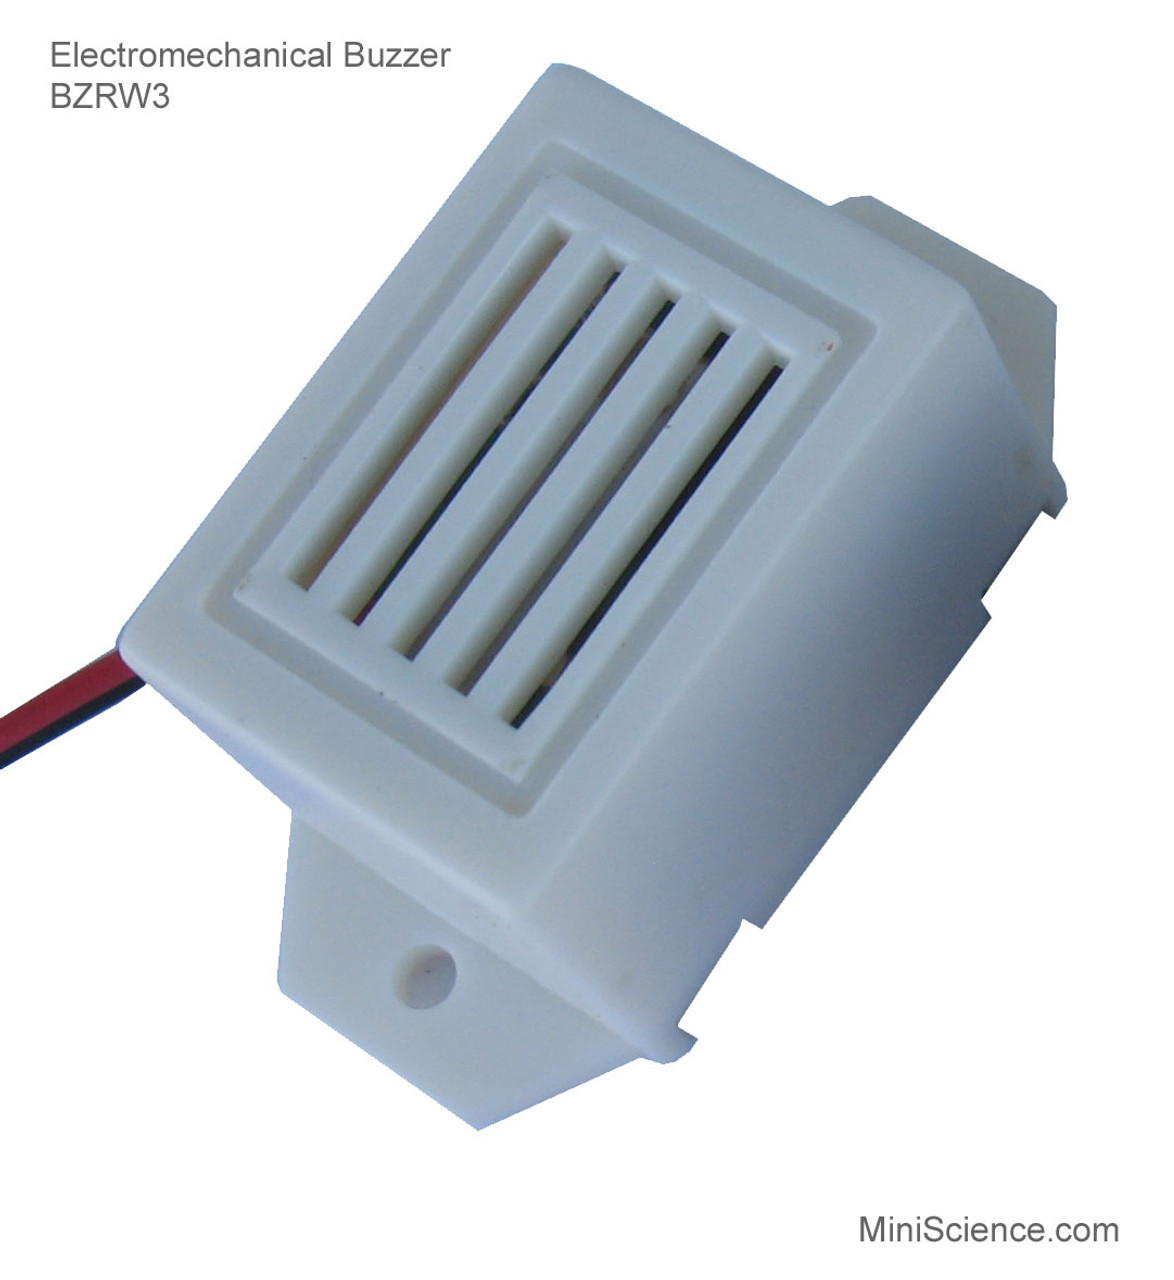 Low voltage buzzer requires 1.5 volt up to 3 volts to operate